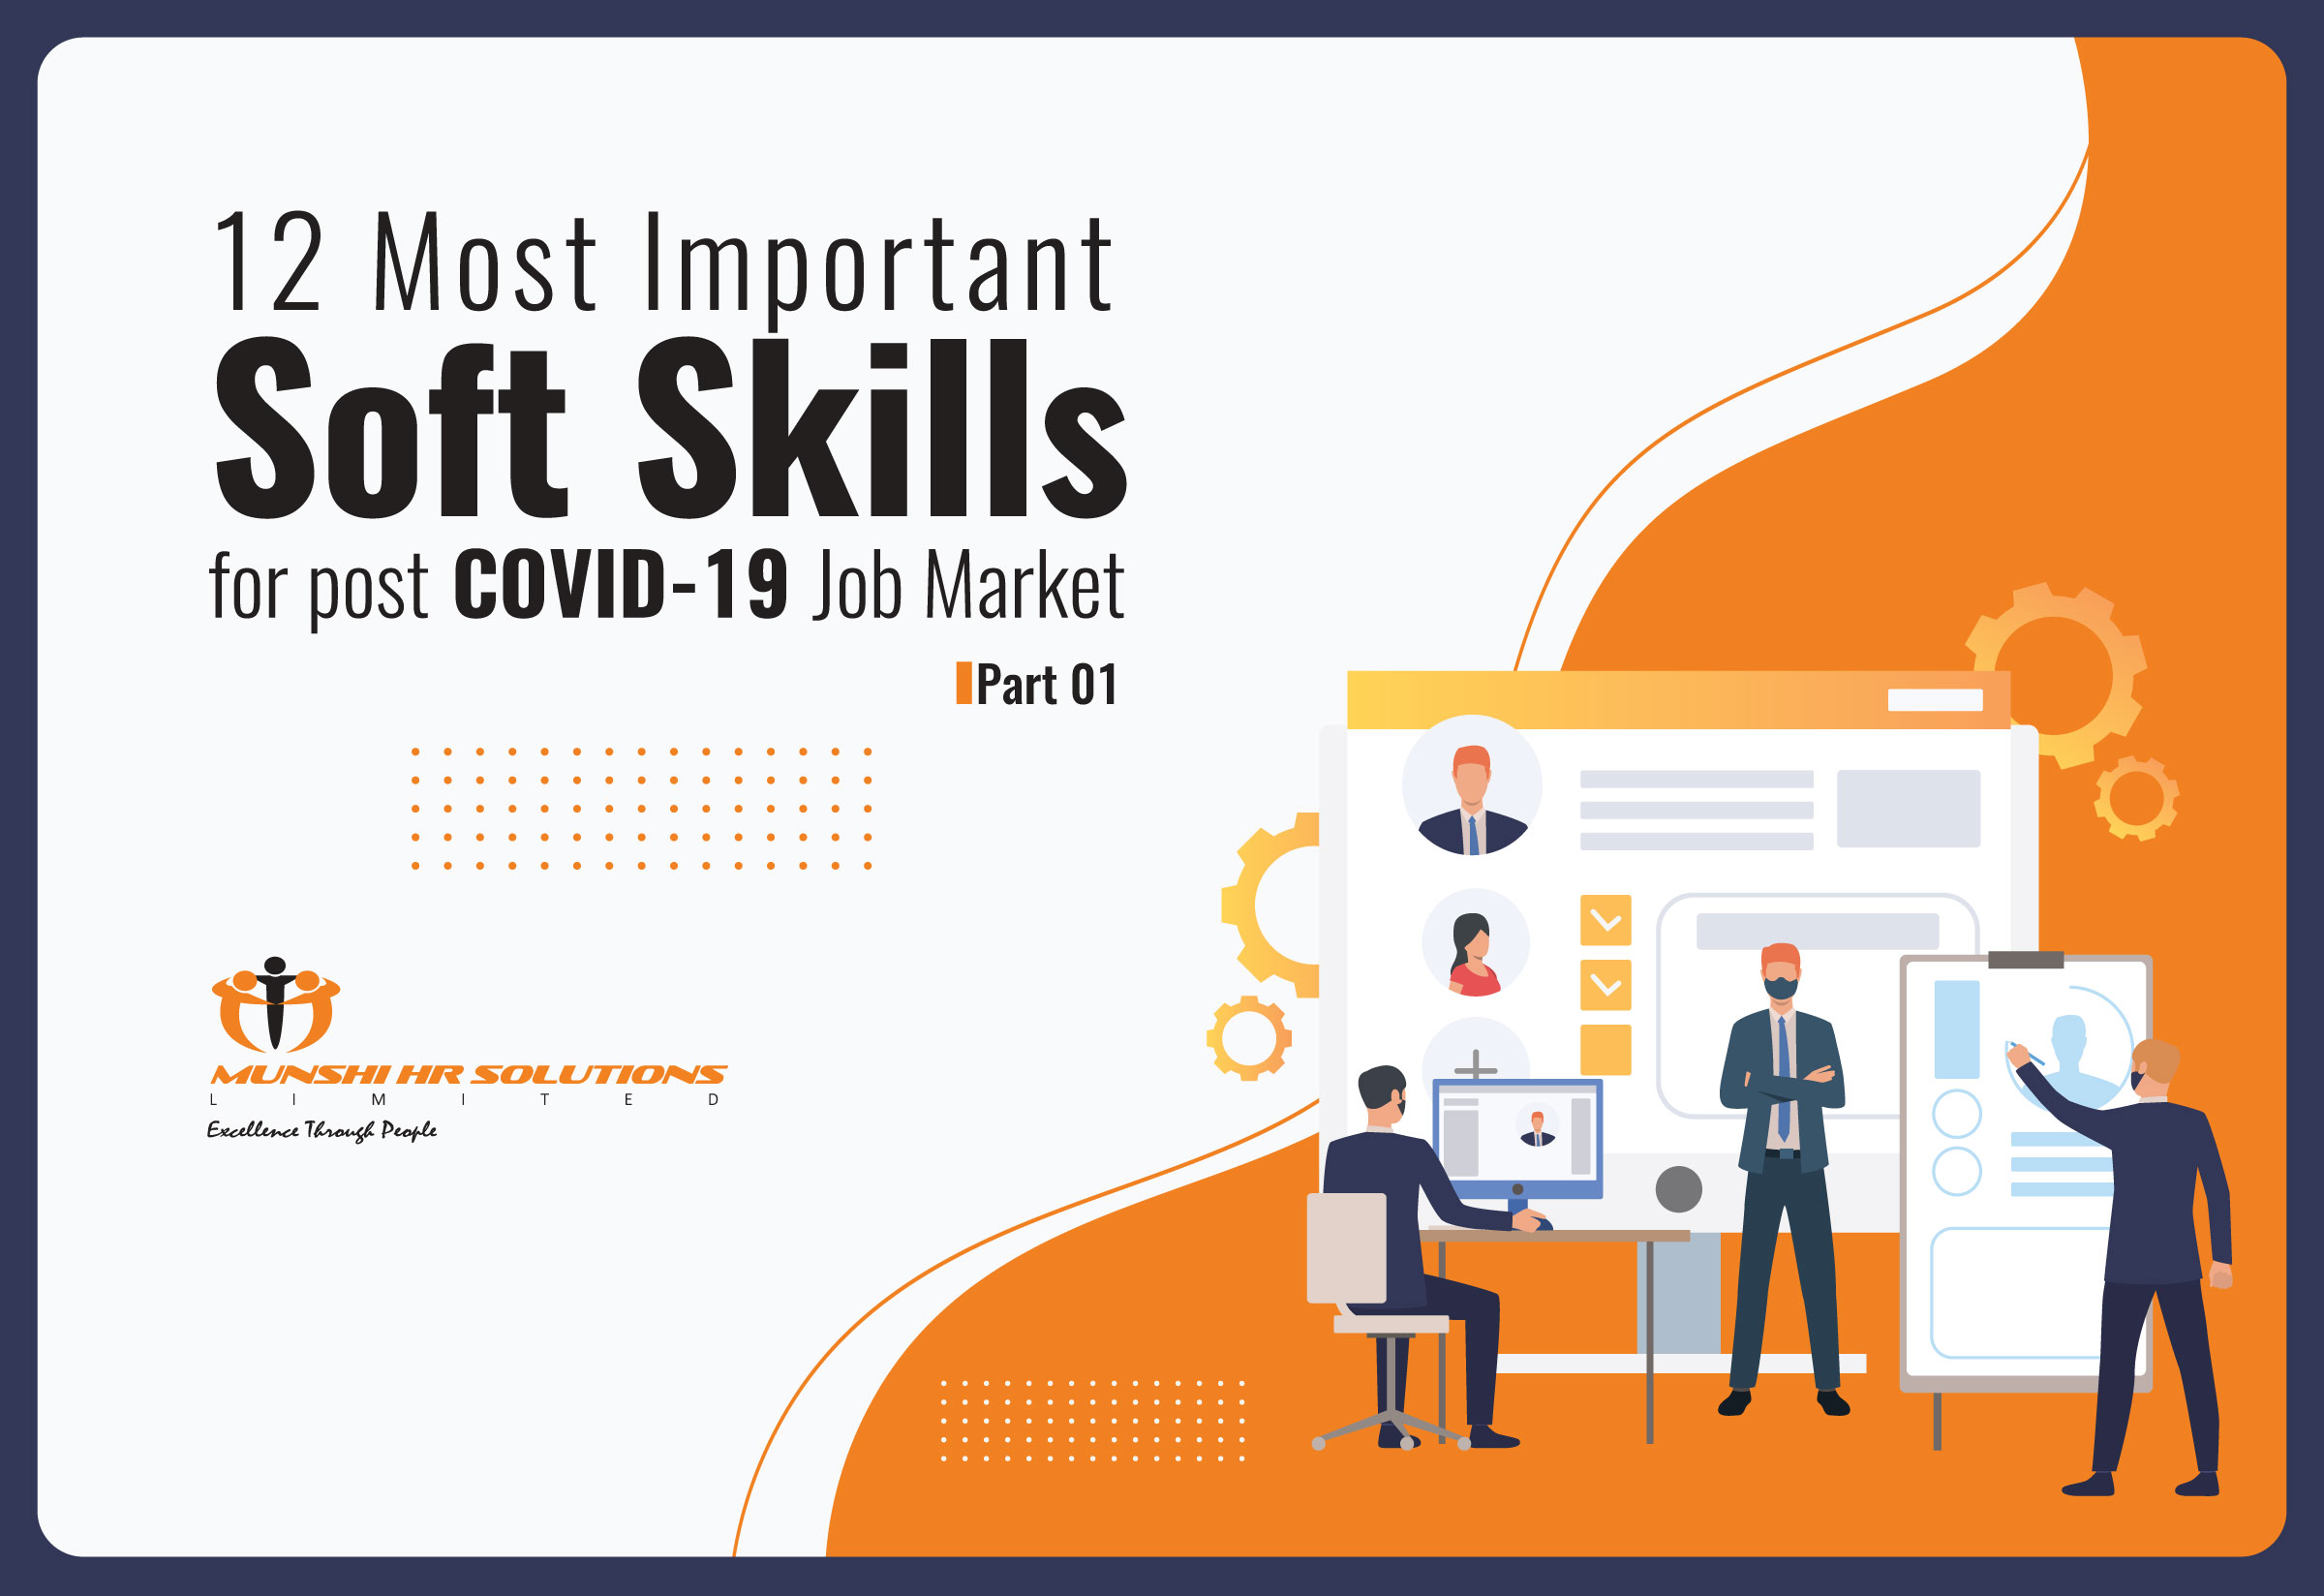 12 most important soft skills for the post COVID job market